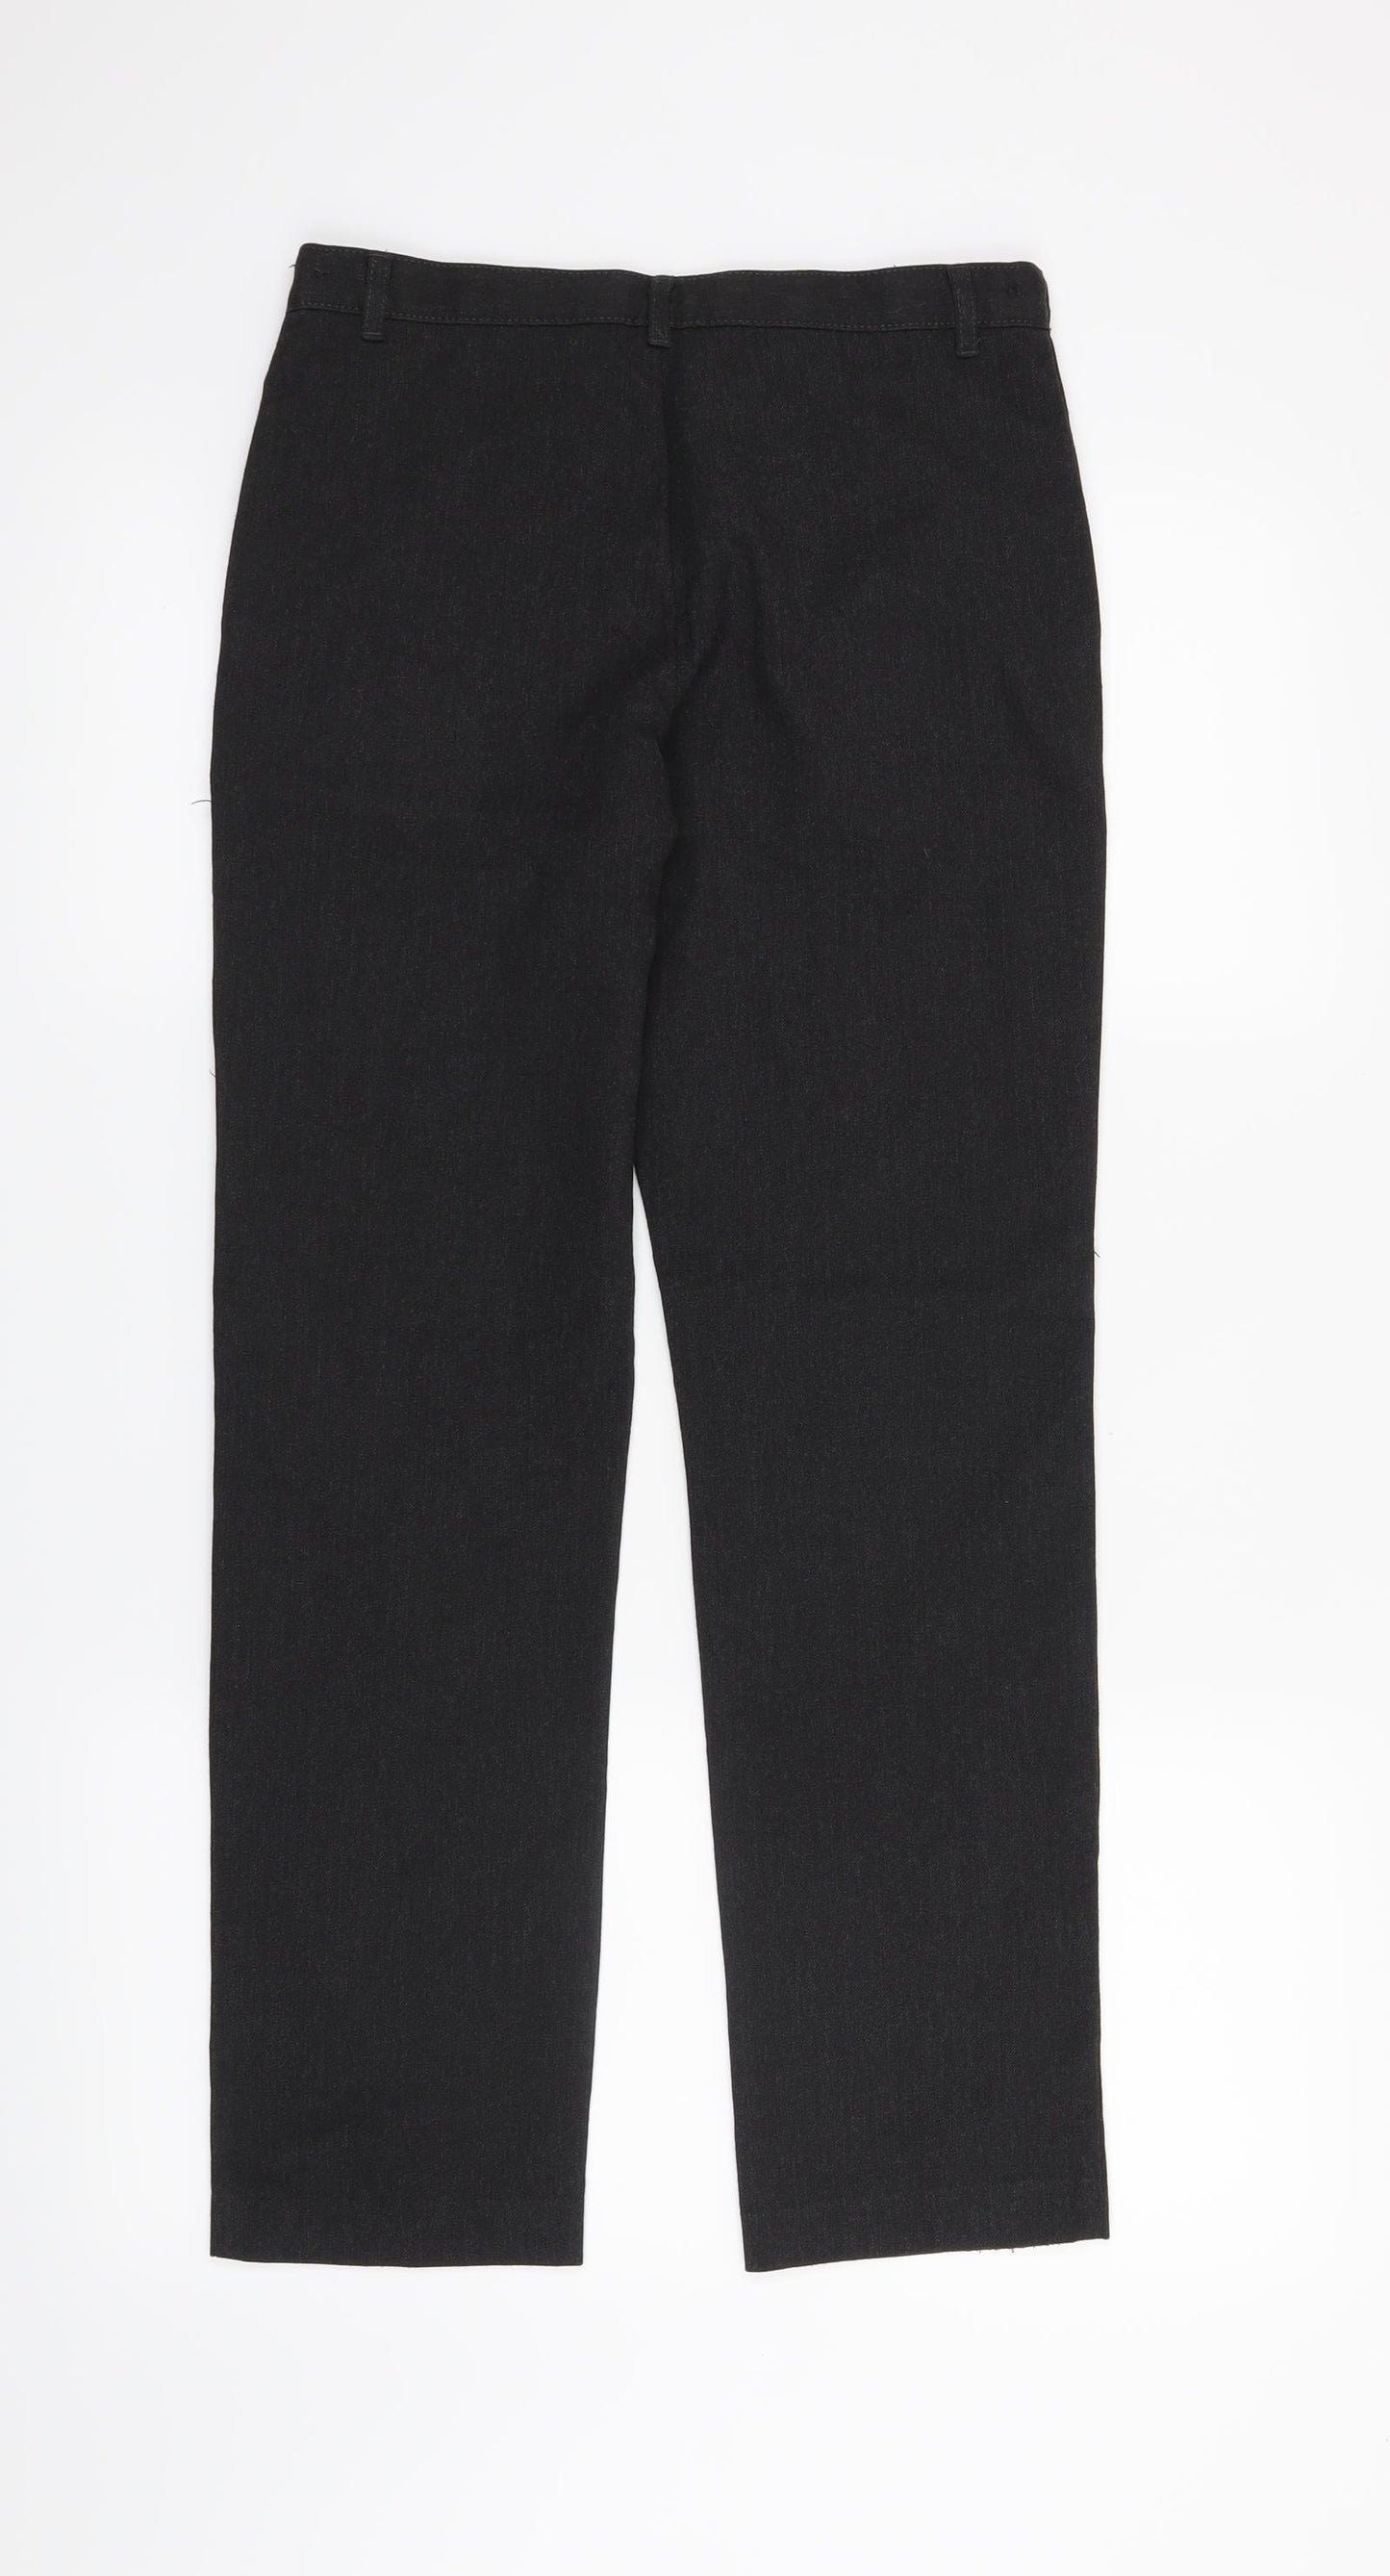 George Boys Grey   Dress Pants Trousers Size 11-12 Years